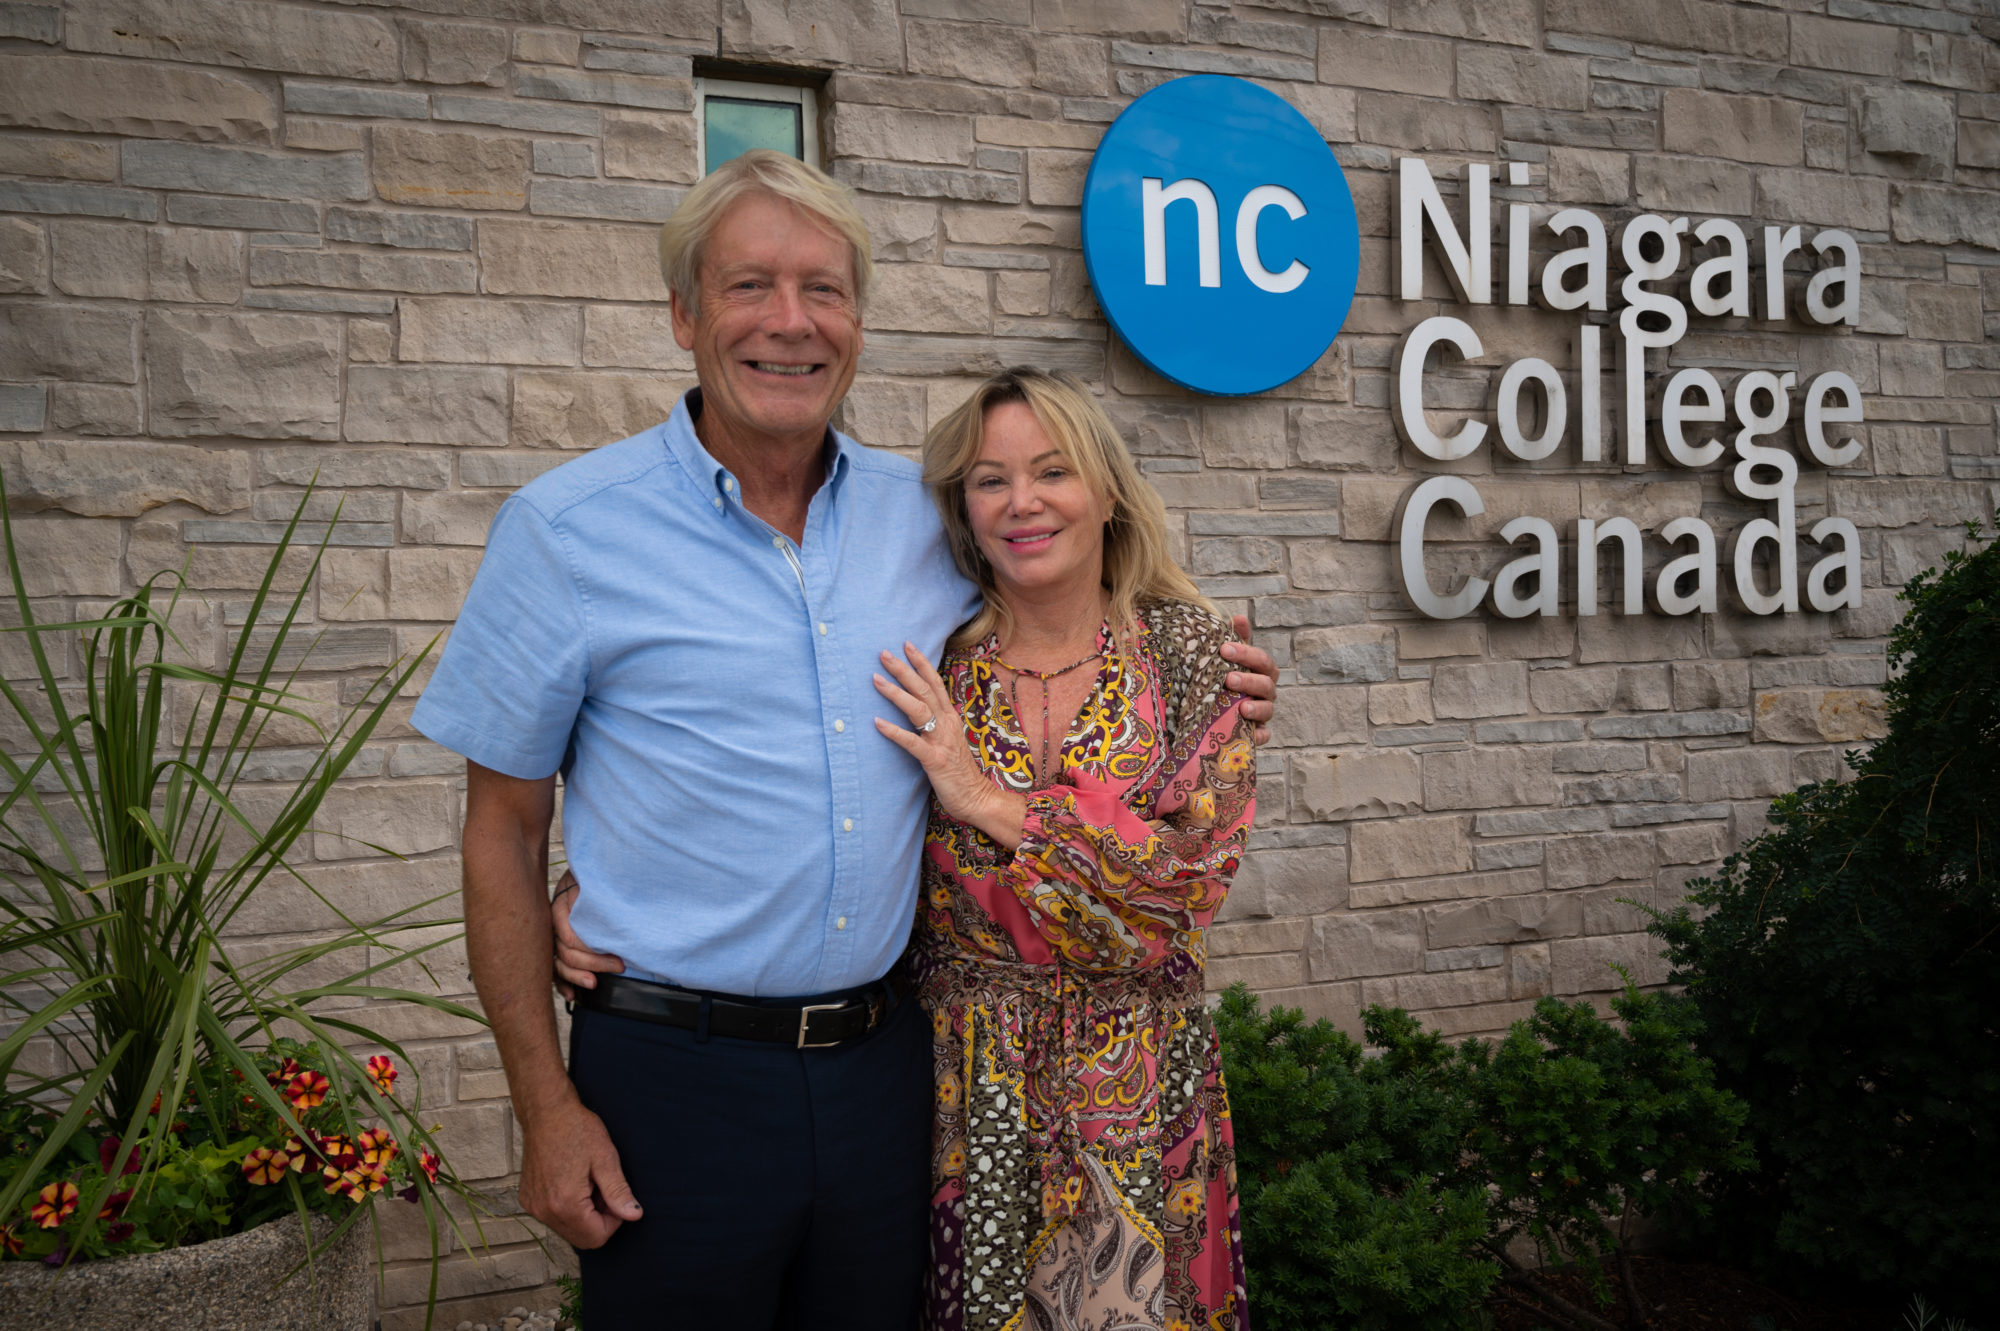 A smartly dressed couple stands in front of the a building that features the Niagara College logo.